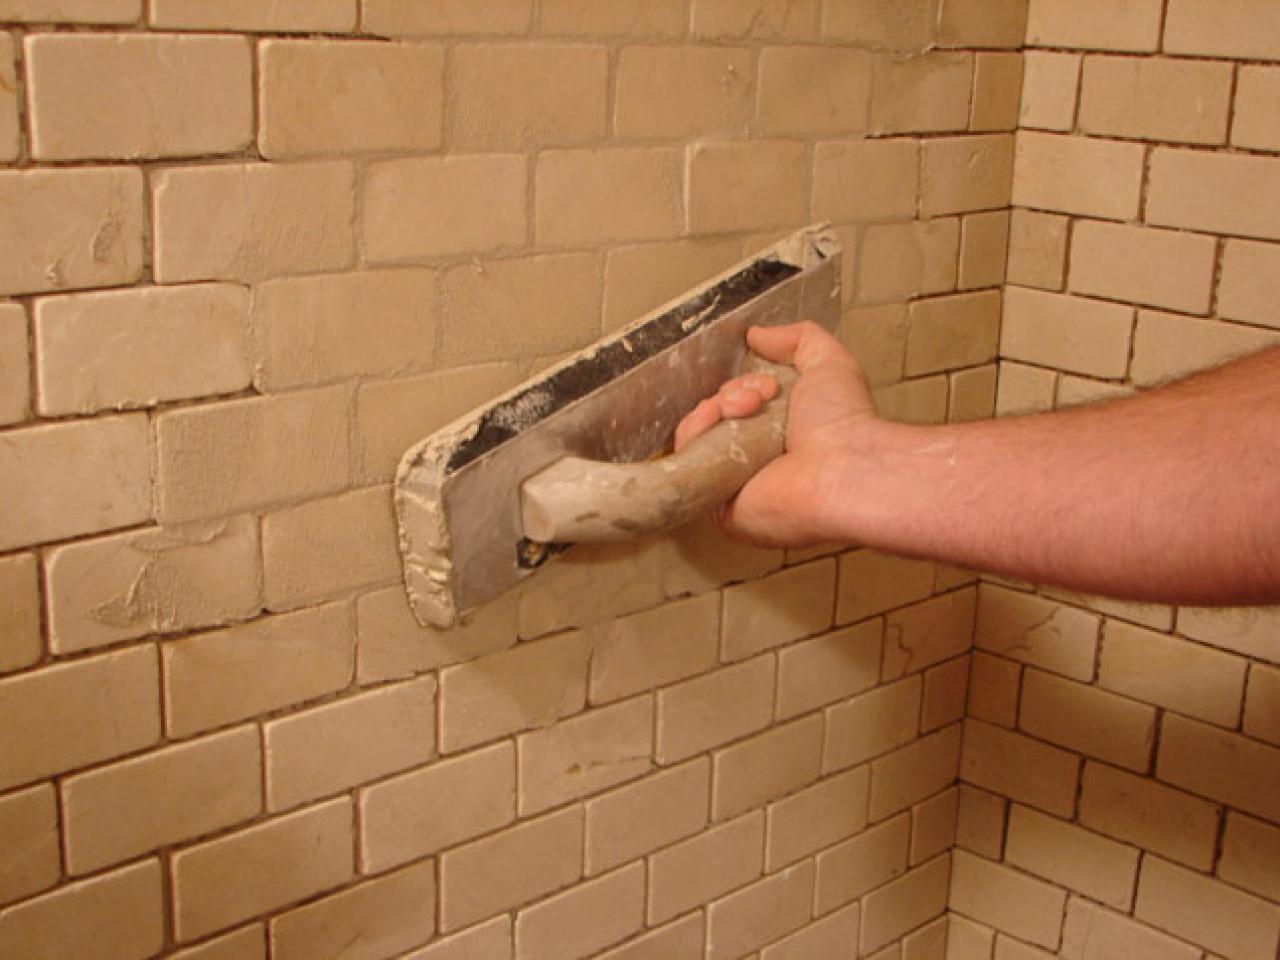 Install Tile In A Bathroom Shower, How To Build Shower Walls For Tile